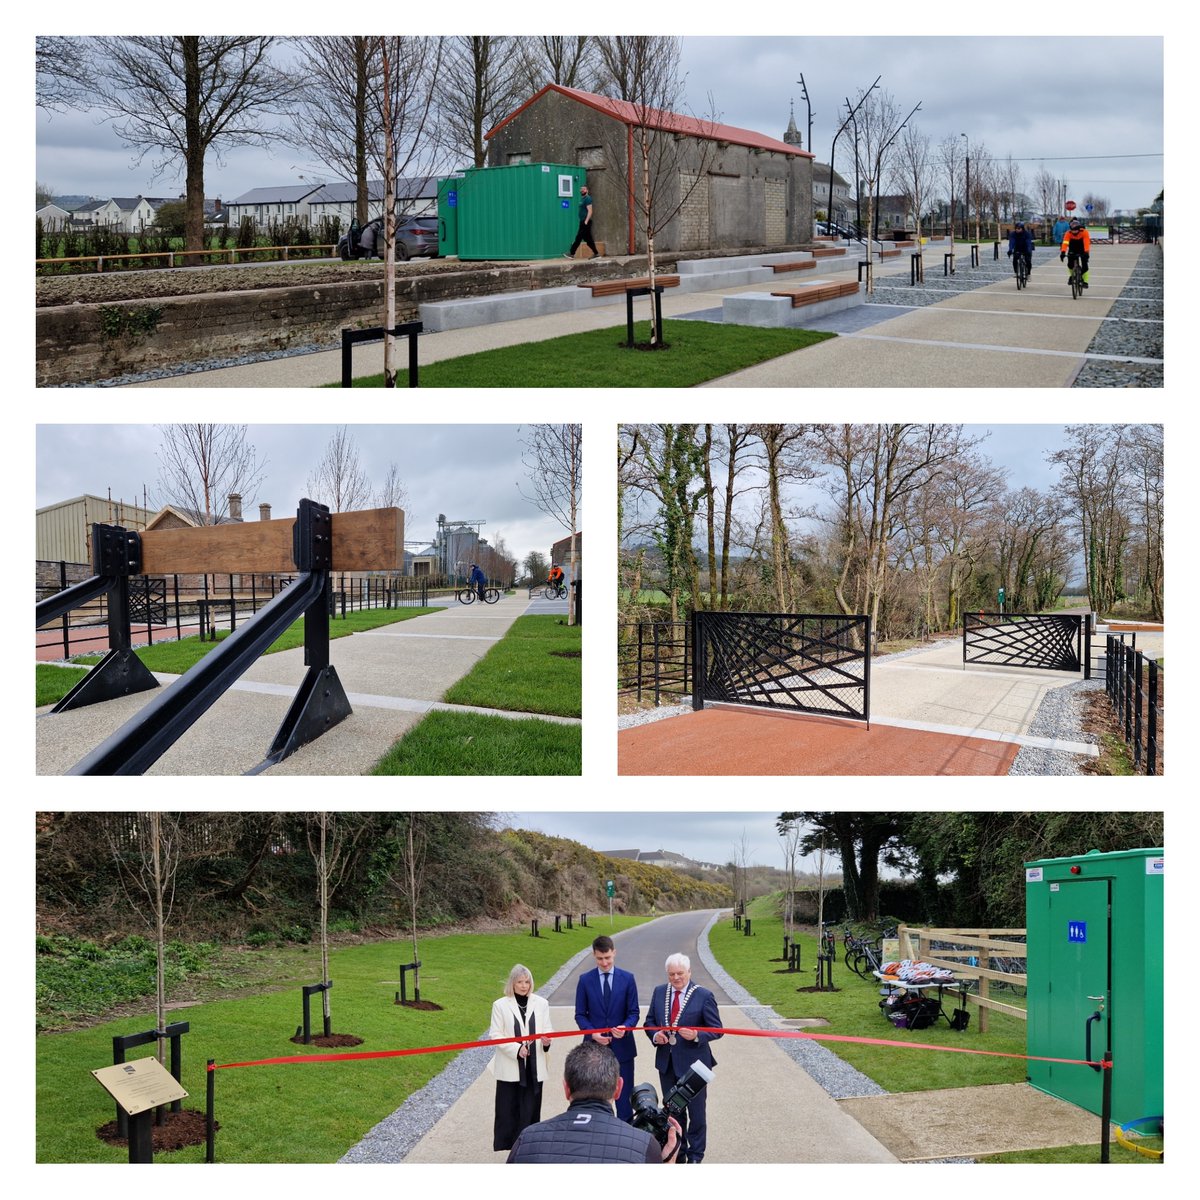 Last week we attended the opening of Phase 1 of the Midleton to Youghal Greenway. 8km of foot and cycle path, 2 new trailhead hubs and the wonderful East Cork countryside.😀 #active #greenway #landscapedesign